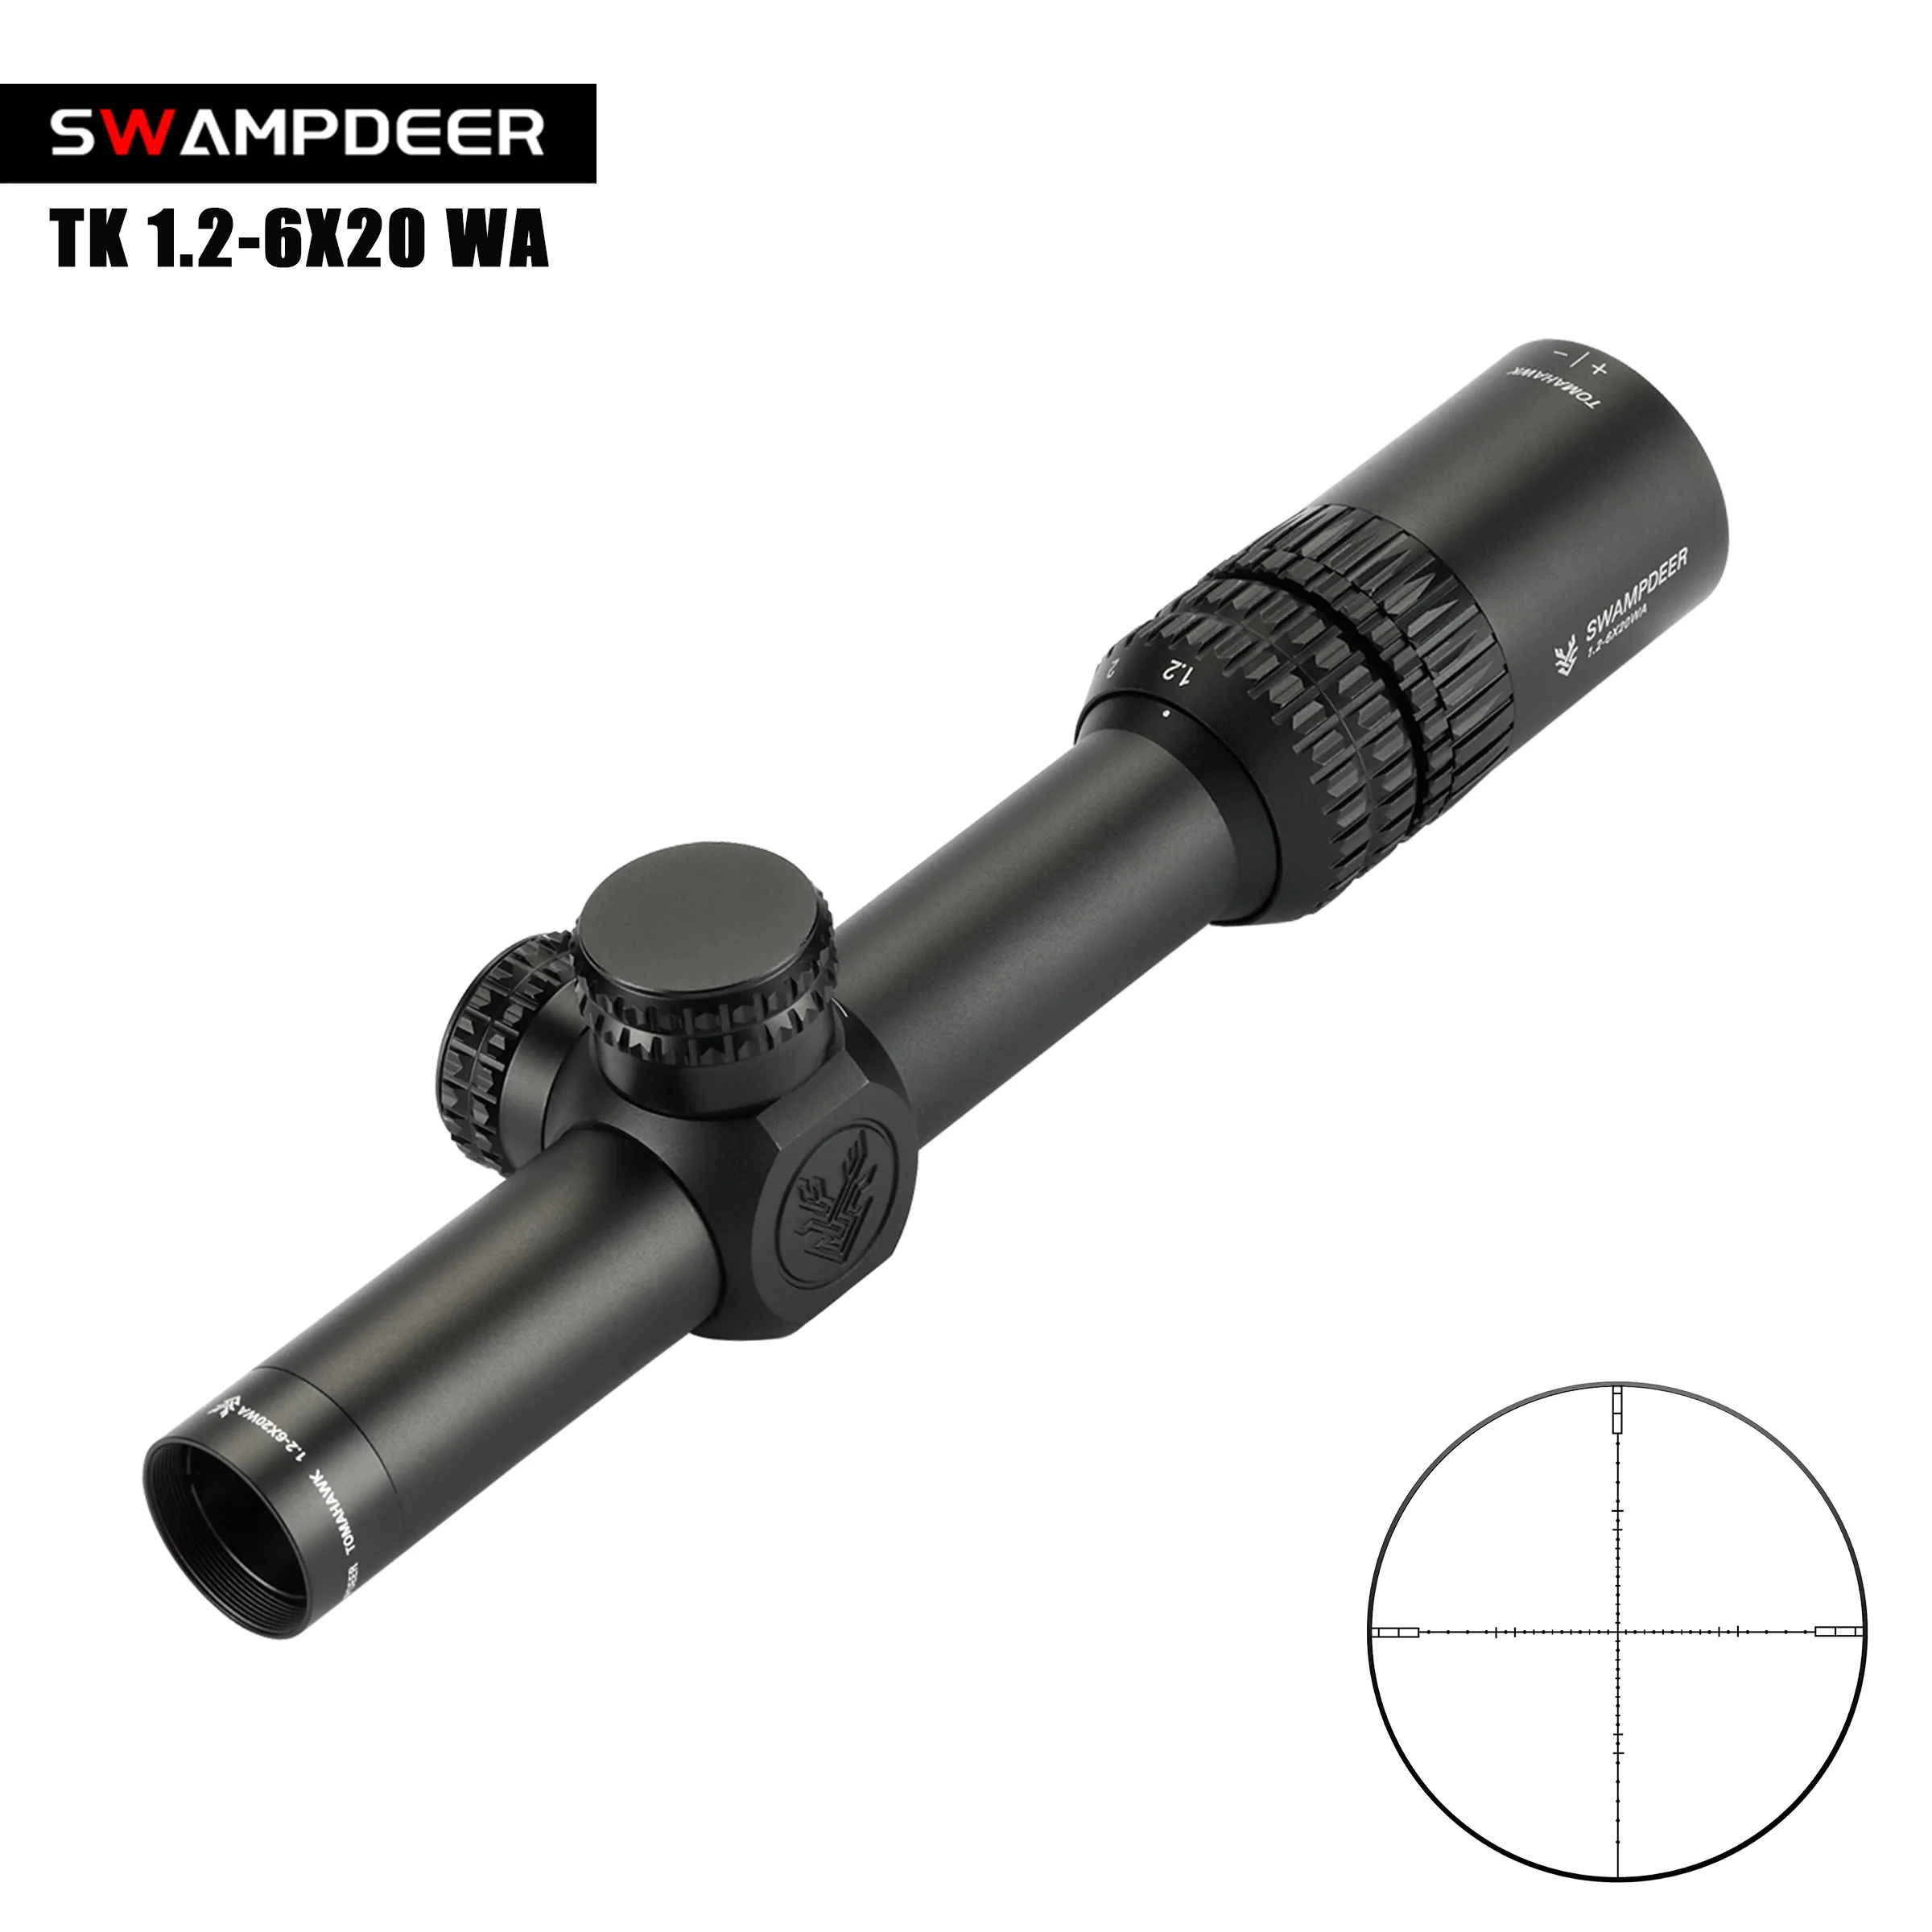 

SWAMP DEER TK 1.2-6X20WA Tactical Hunting Airsoft Optical Scope 1-6x Adjustable Compact Quick Aim Ar 15 Scope Hunting